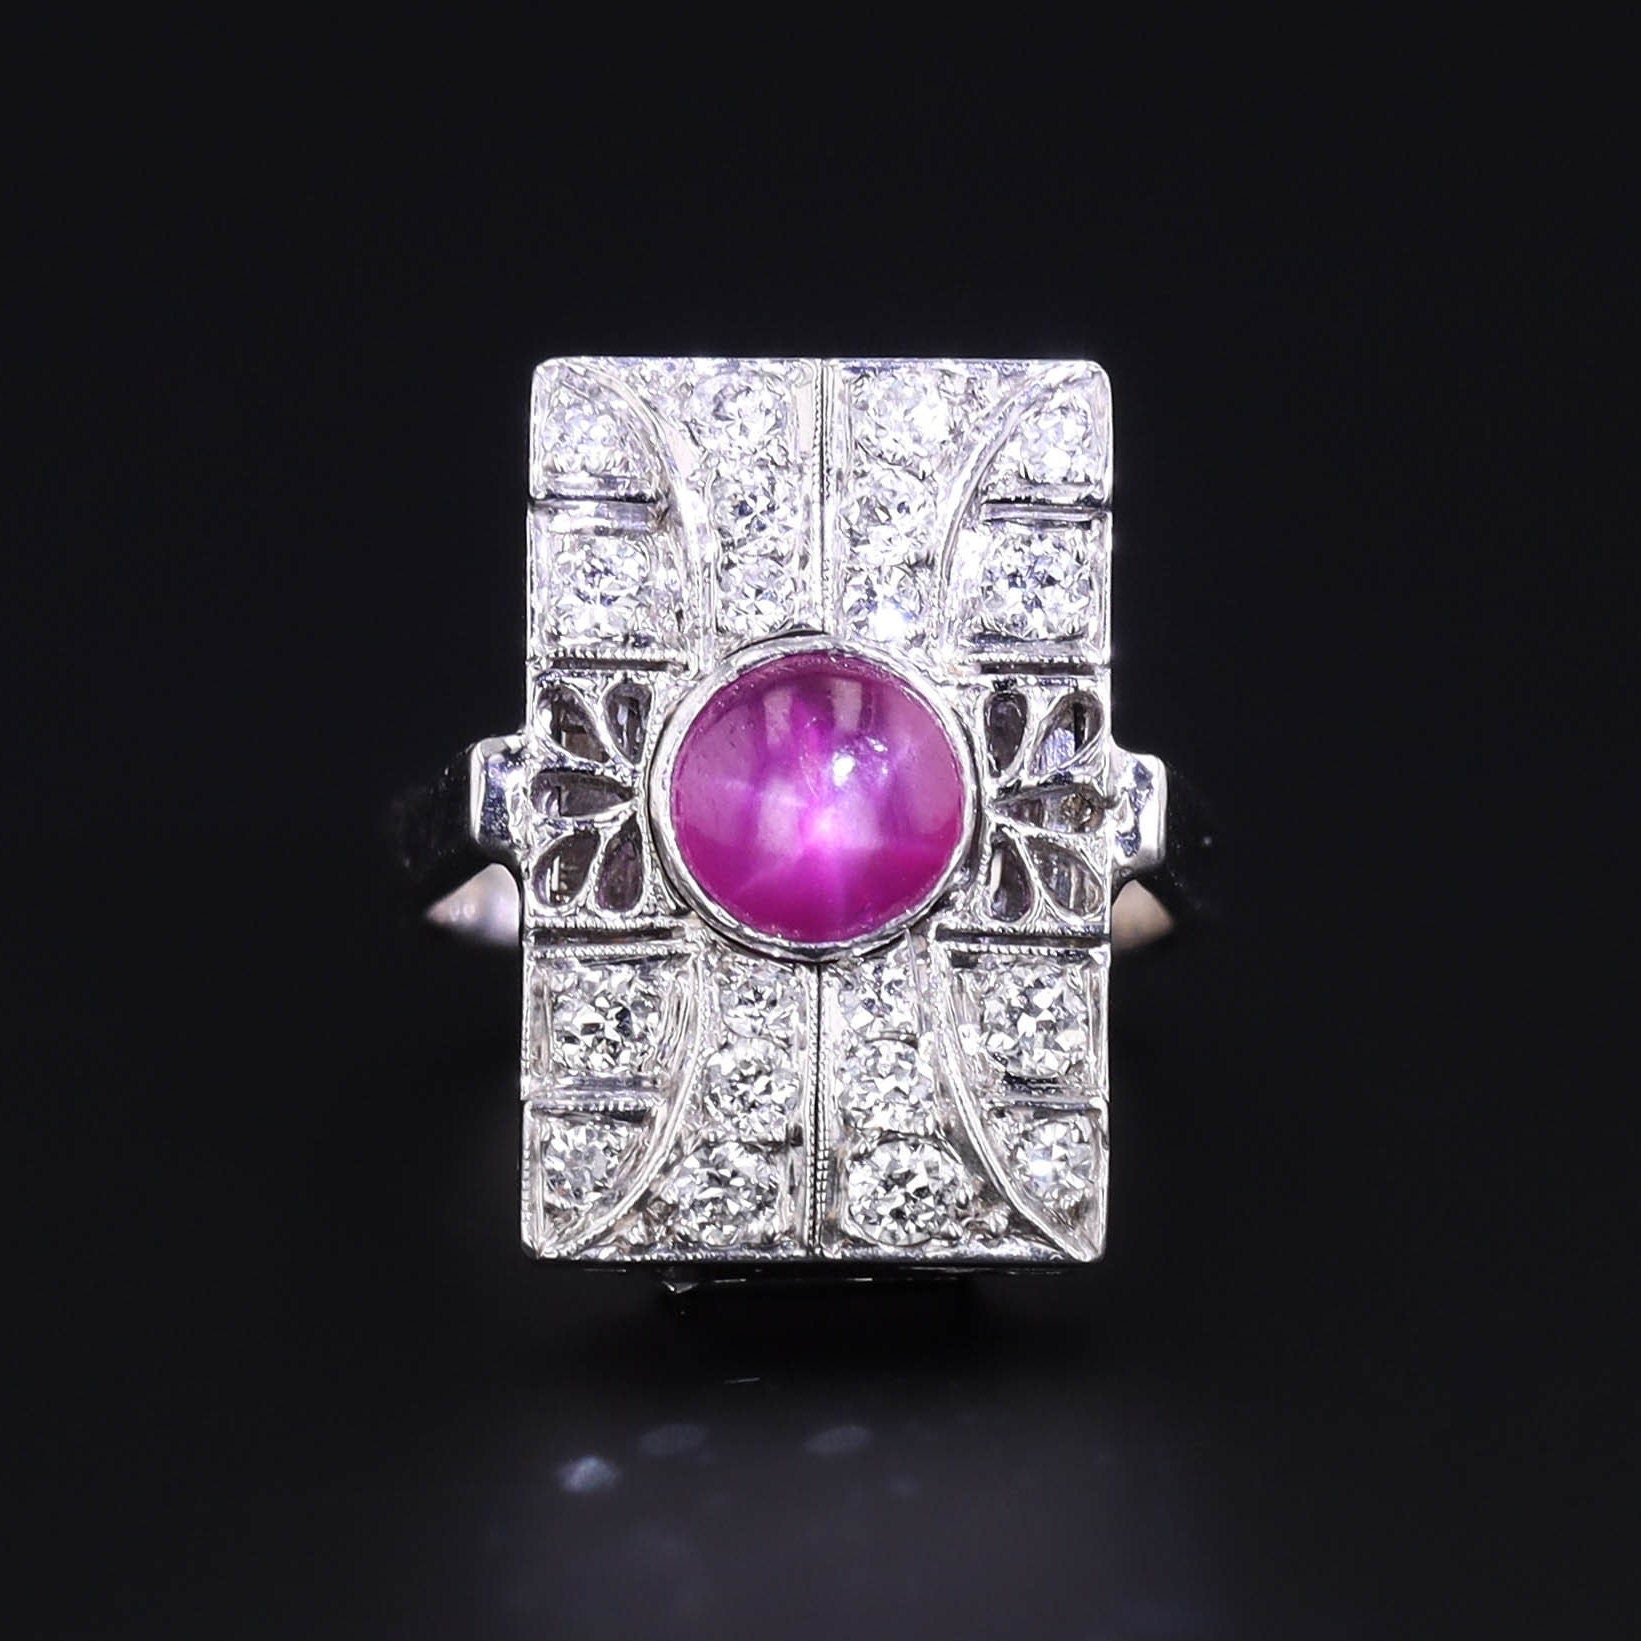 Vintage Pink Star Sapphire and Diamond Ring of 14k White Gold